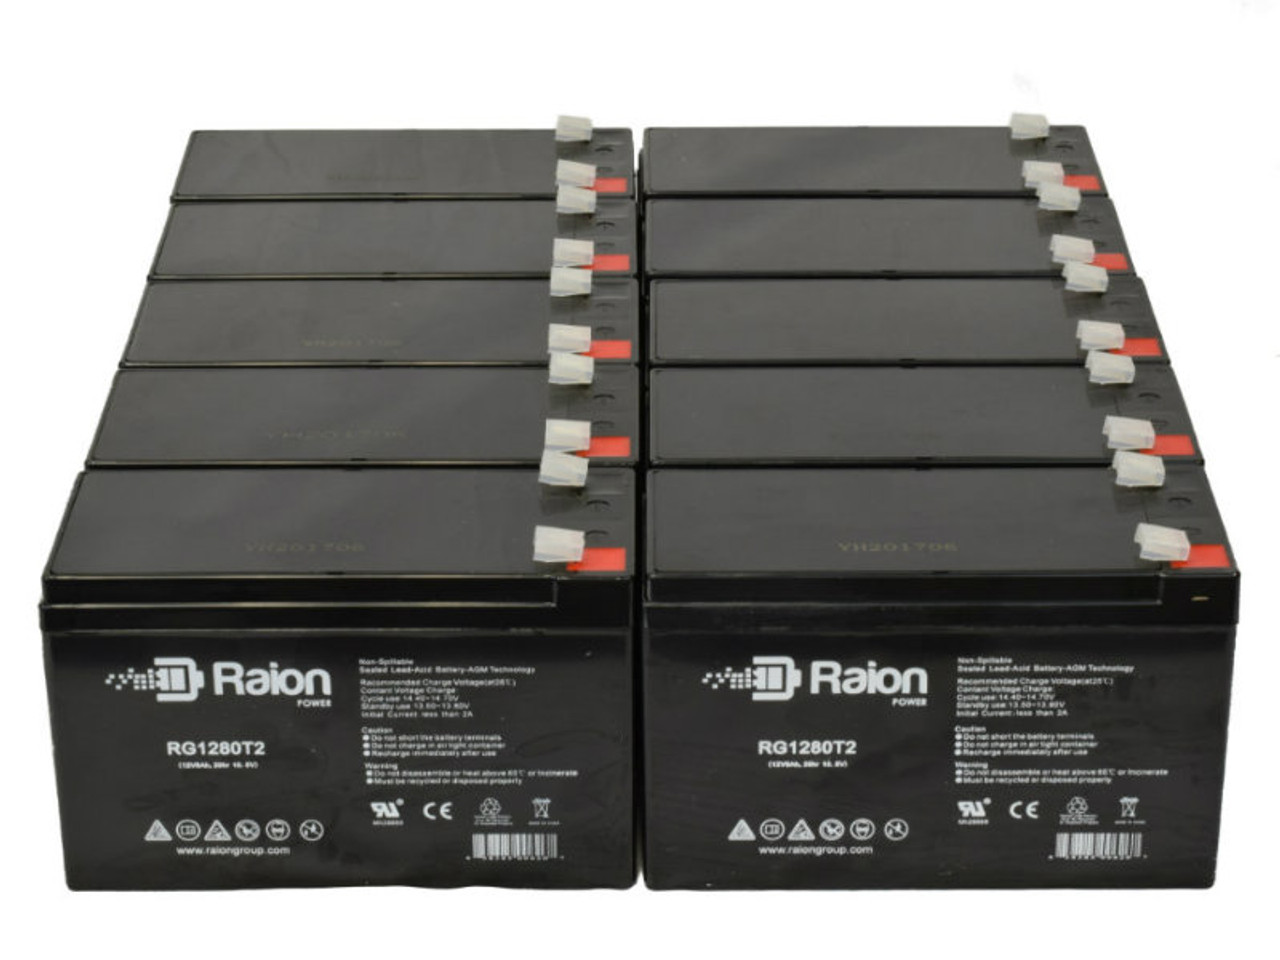 Raion Power Replacement 12V 8Ah RG1280T2 Battery for Hoffman Laroche Micromonitor 7141 Ecg Mon - 10 Pack